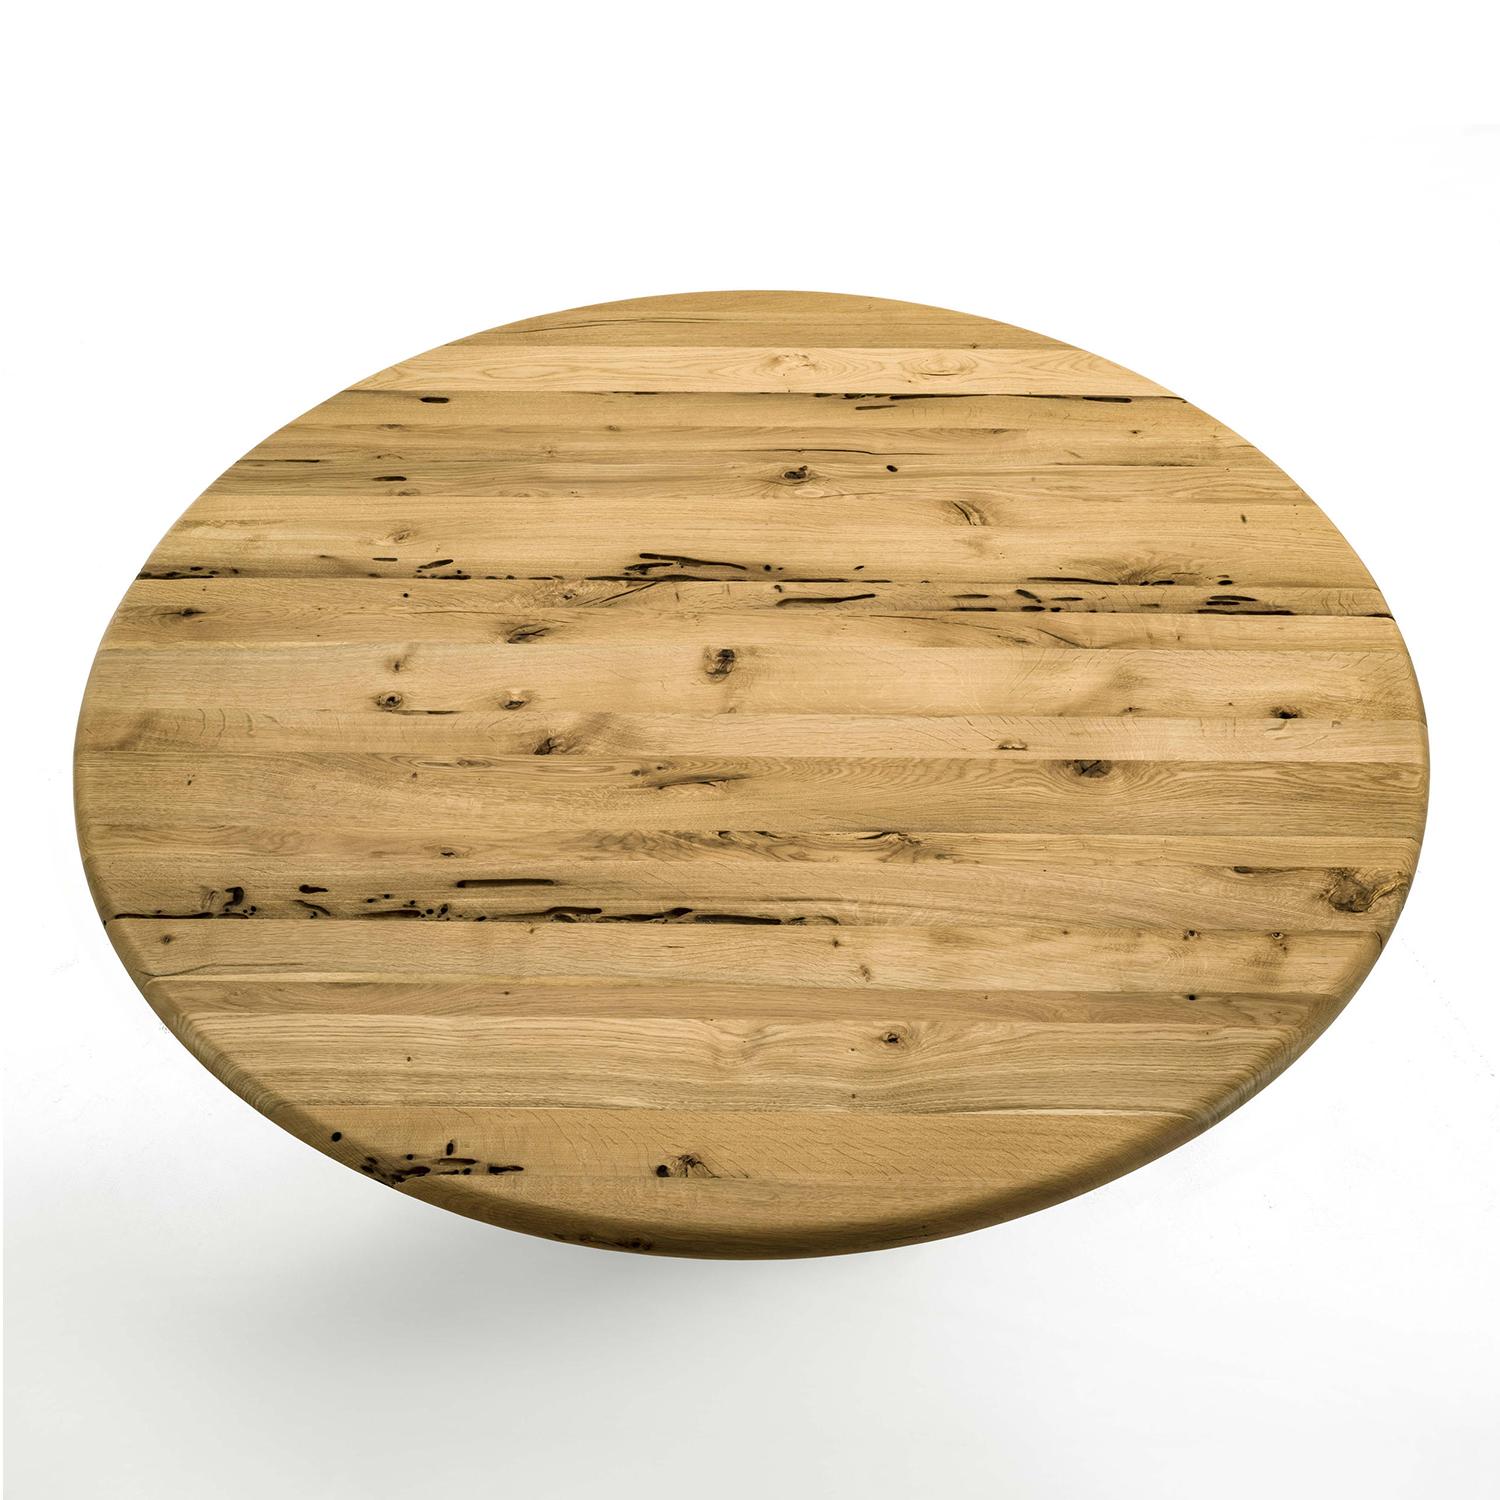 Dining table spirale with all structure
in solid raw oak.
Diameter 200xH75cm, price: 16500,00€.
Also available in:
Diameter 180xH75cm, price: 14900,00€.
Diameter 160xH75cm, price: 12900,00€.
